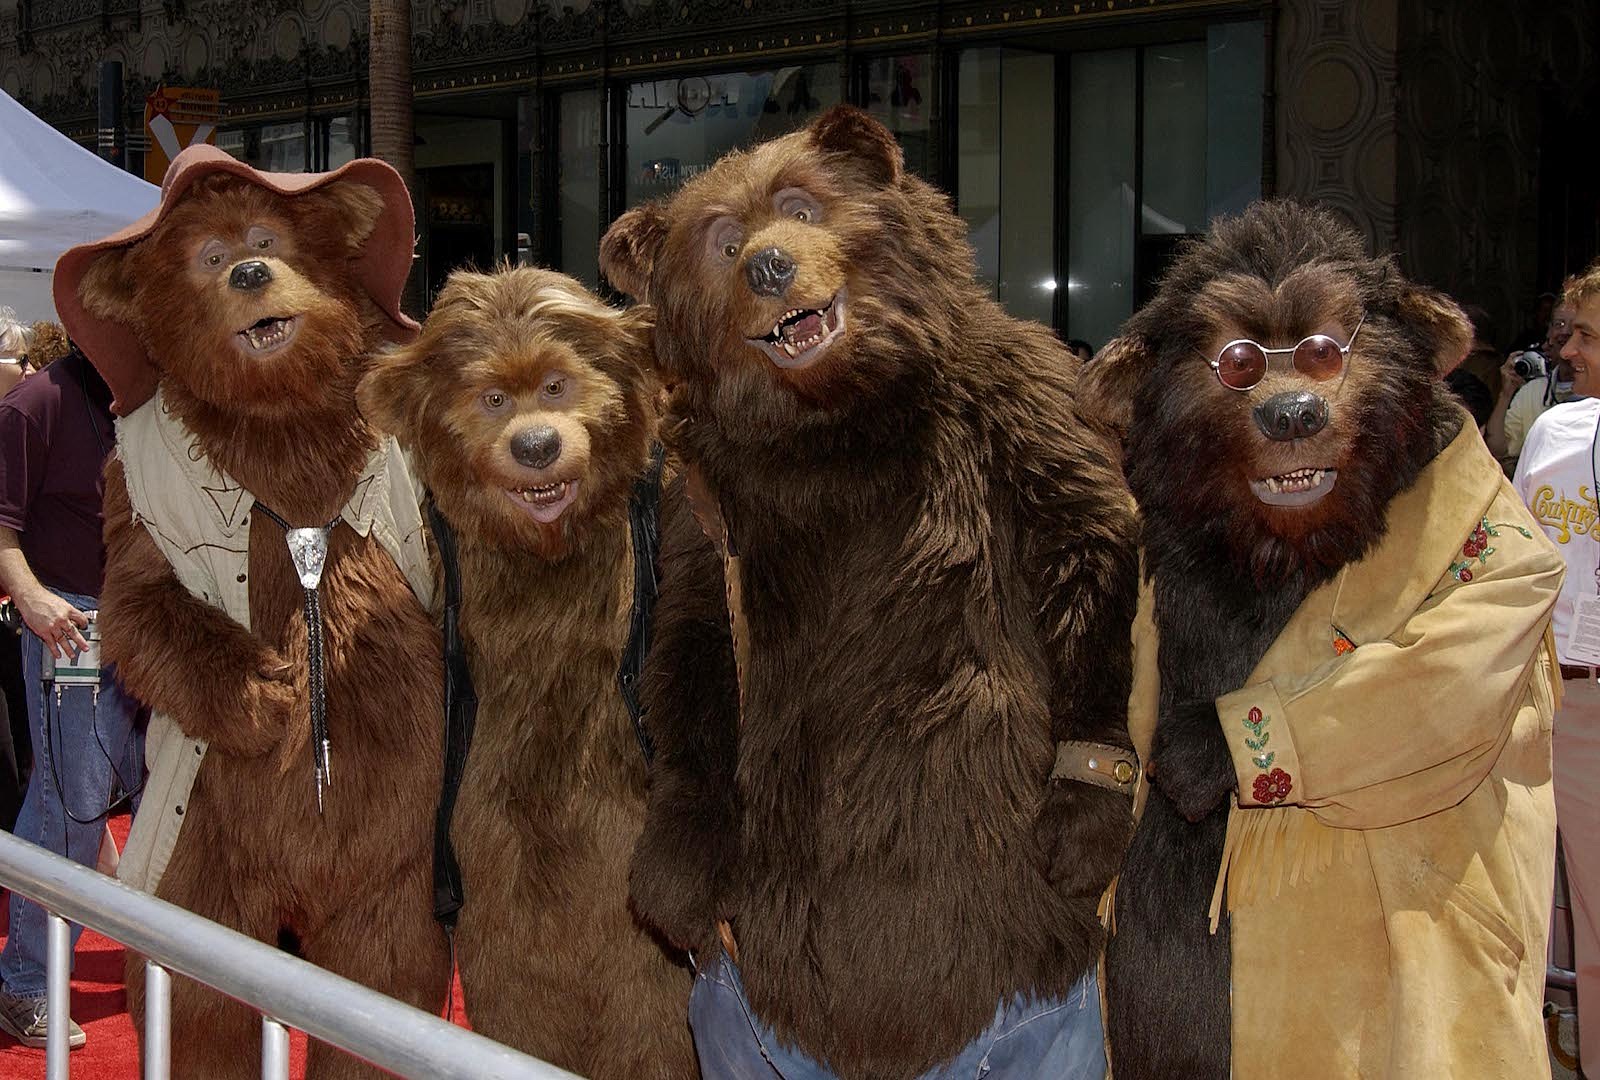 The Country Bears - Wikipedia